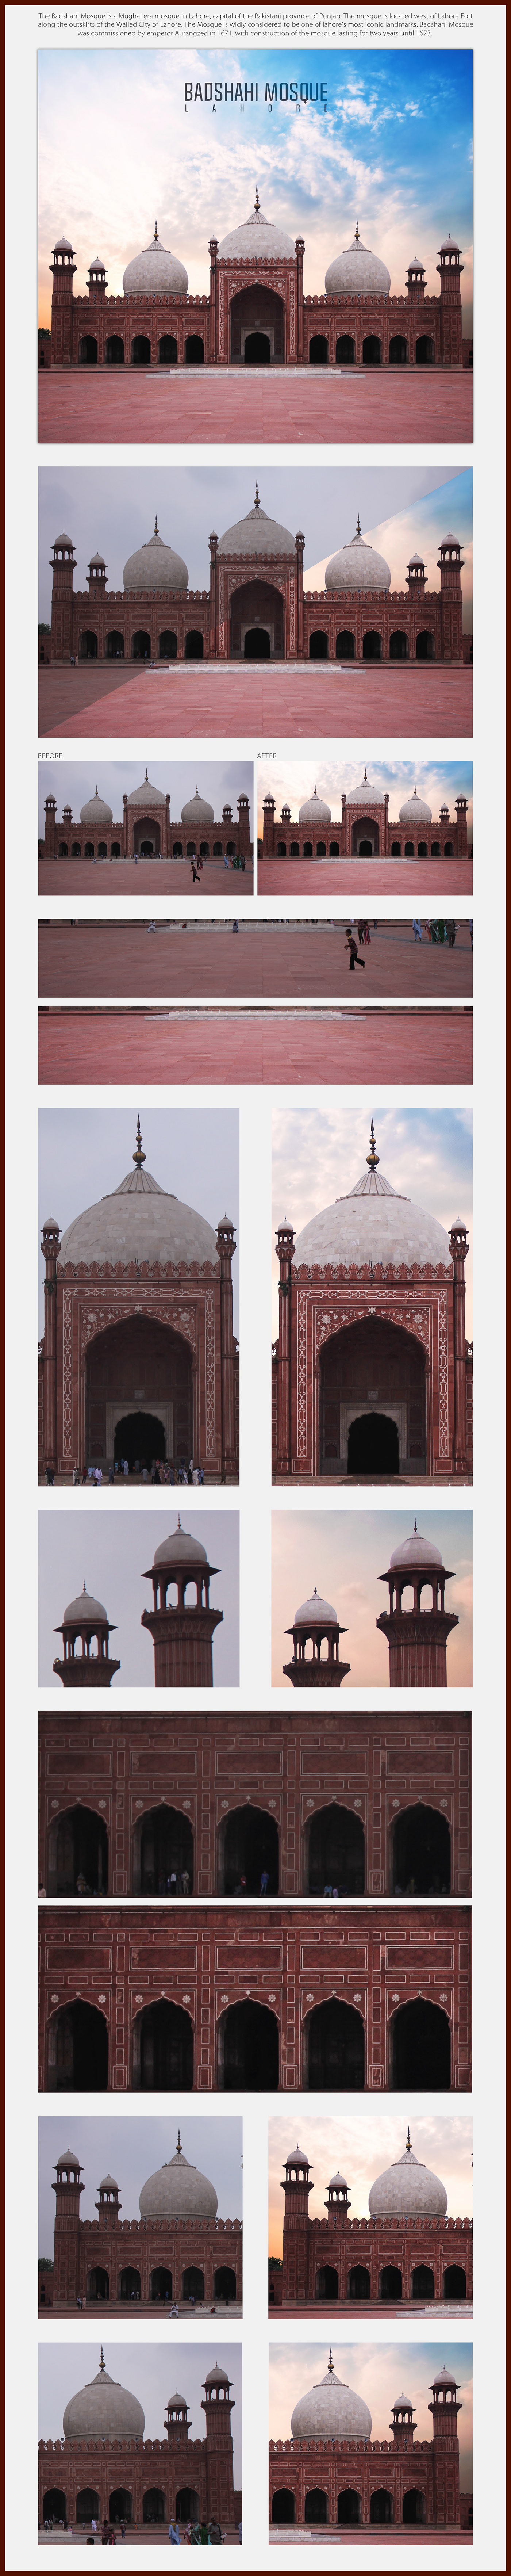 color toning manipulate Background Change architecture mogul empire history mosque shading Editing 